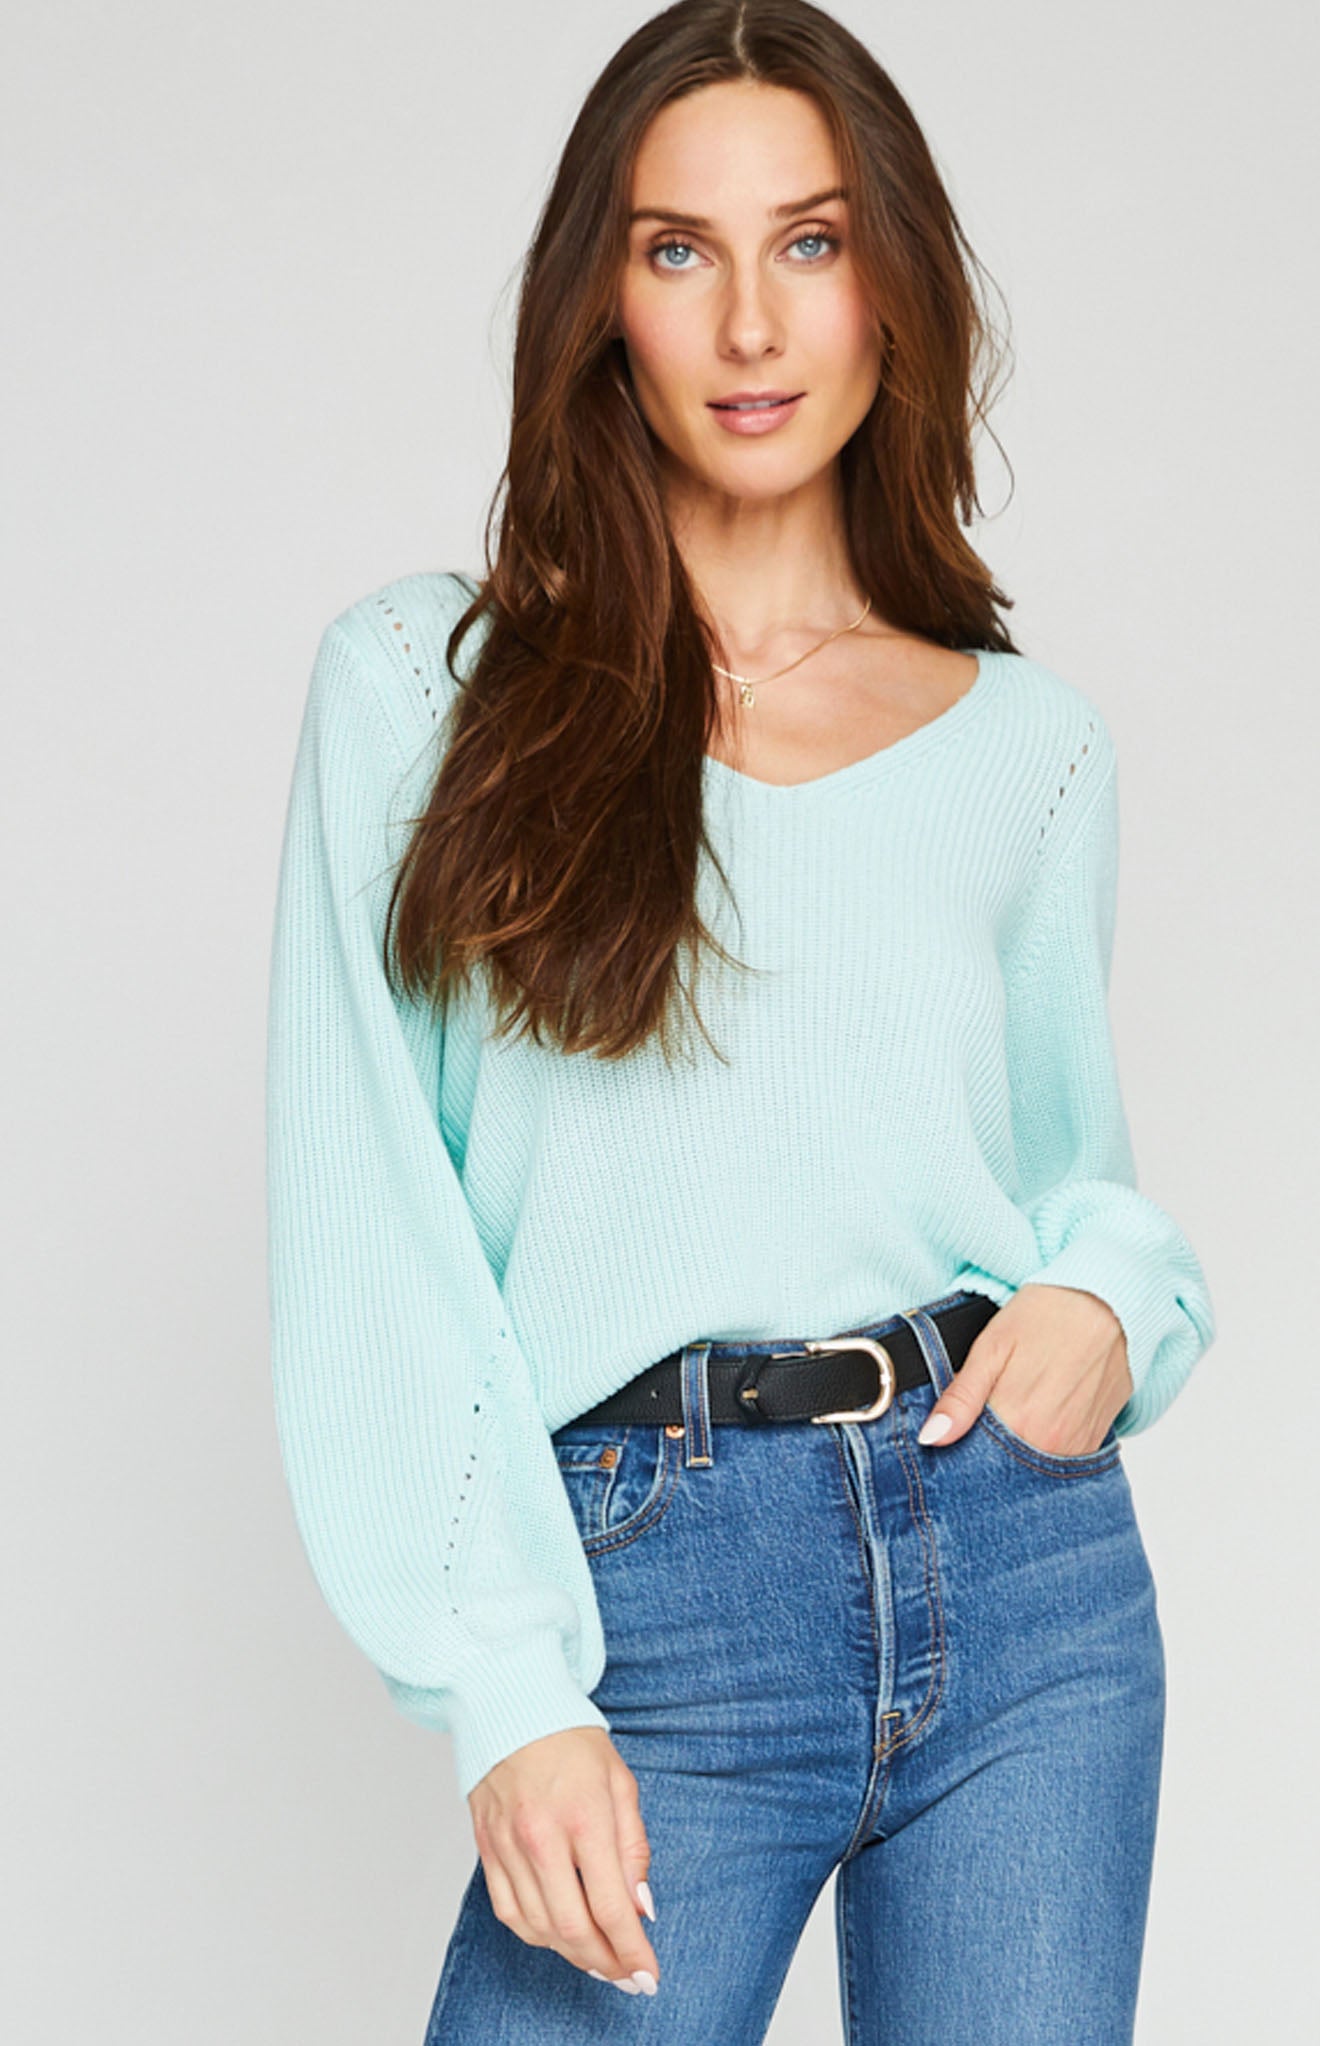 Hailey Pullover Sweater